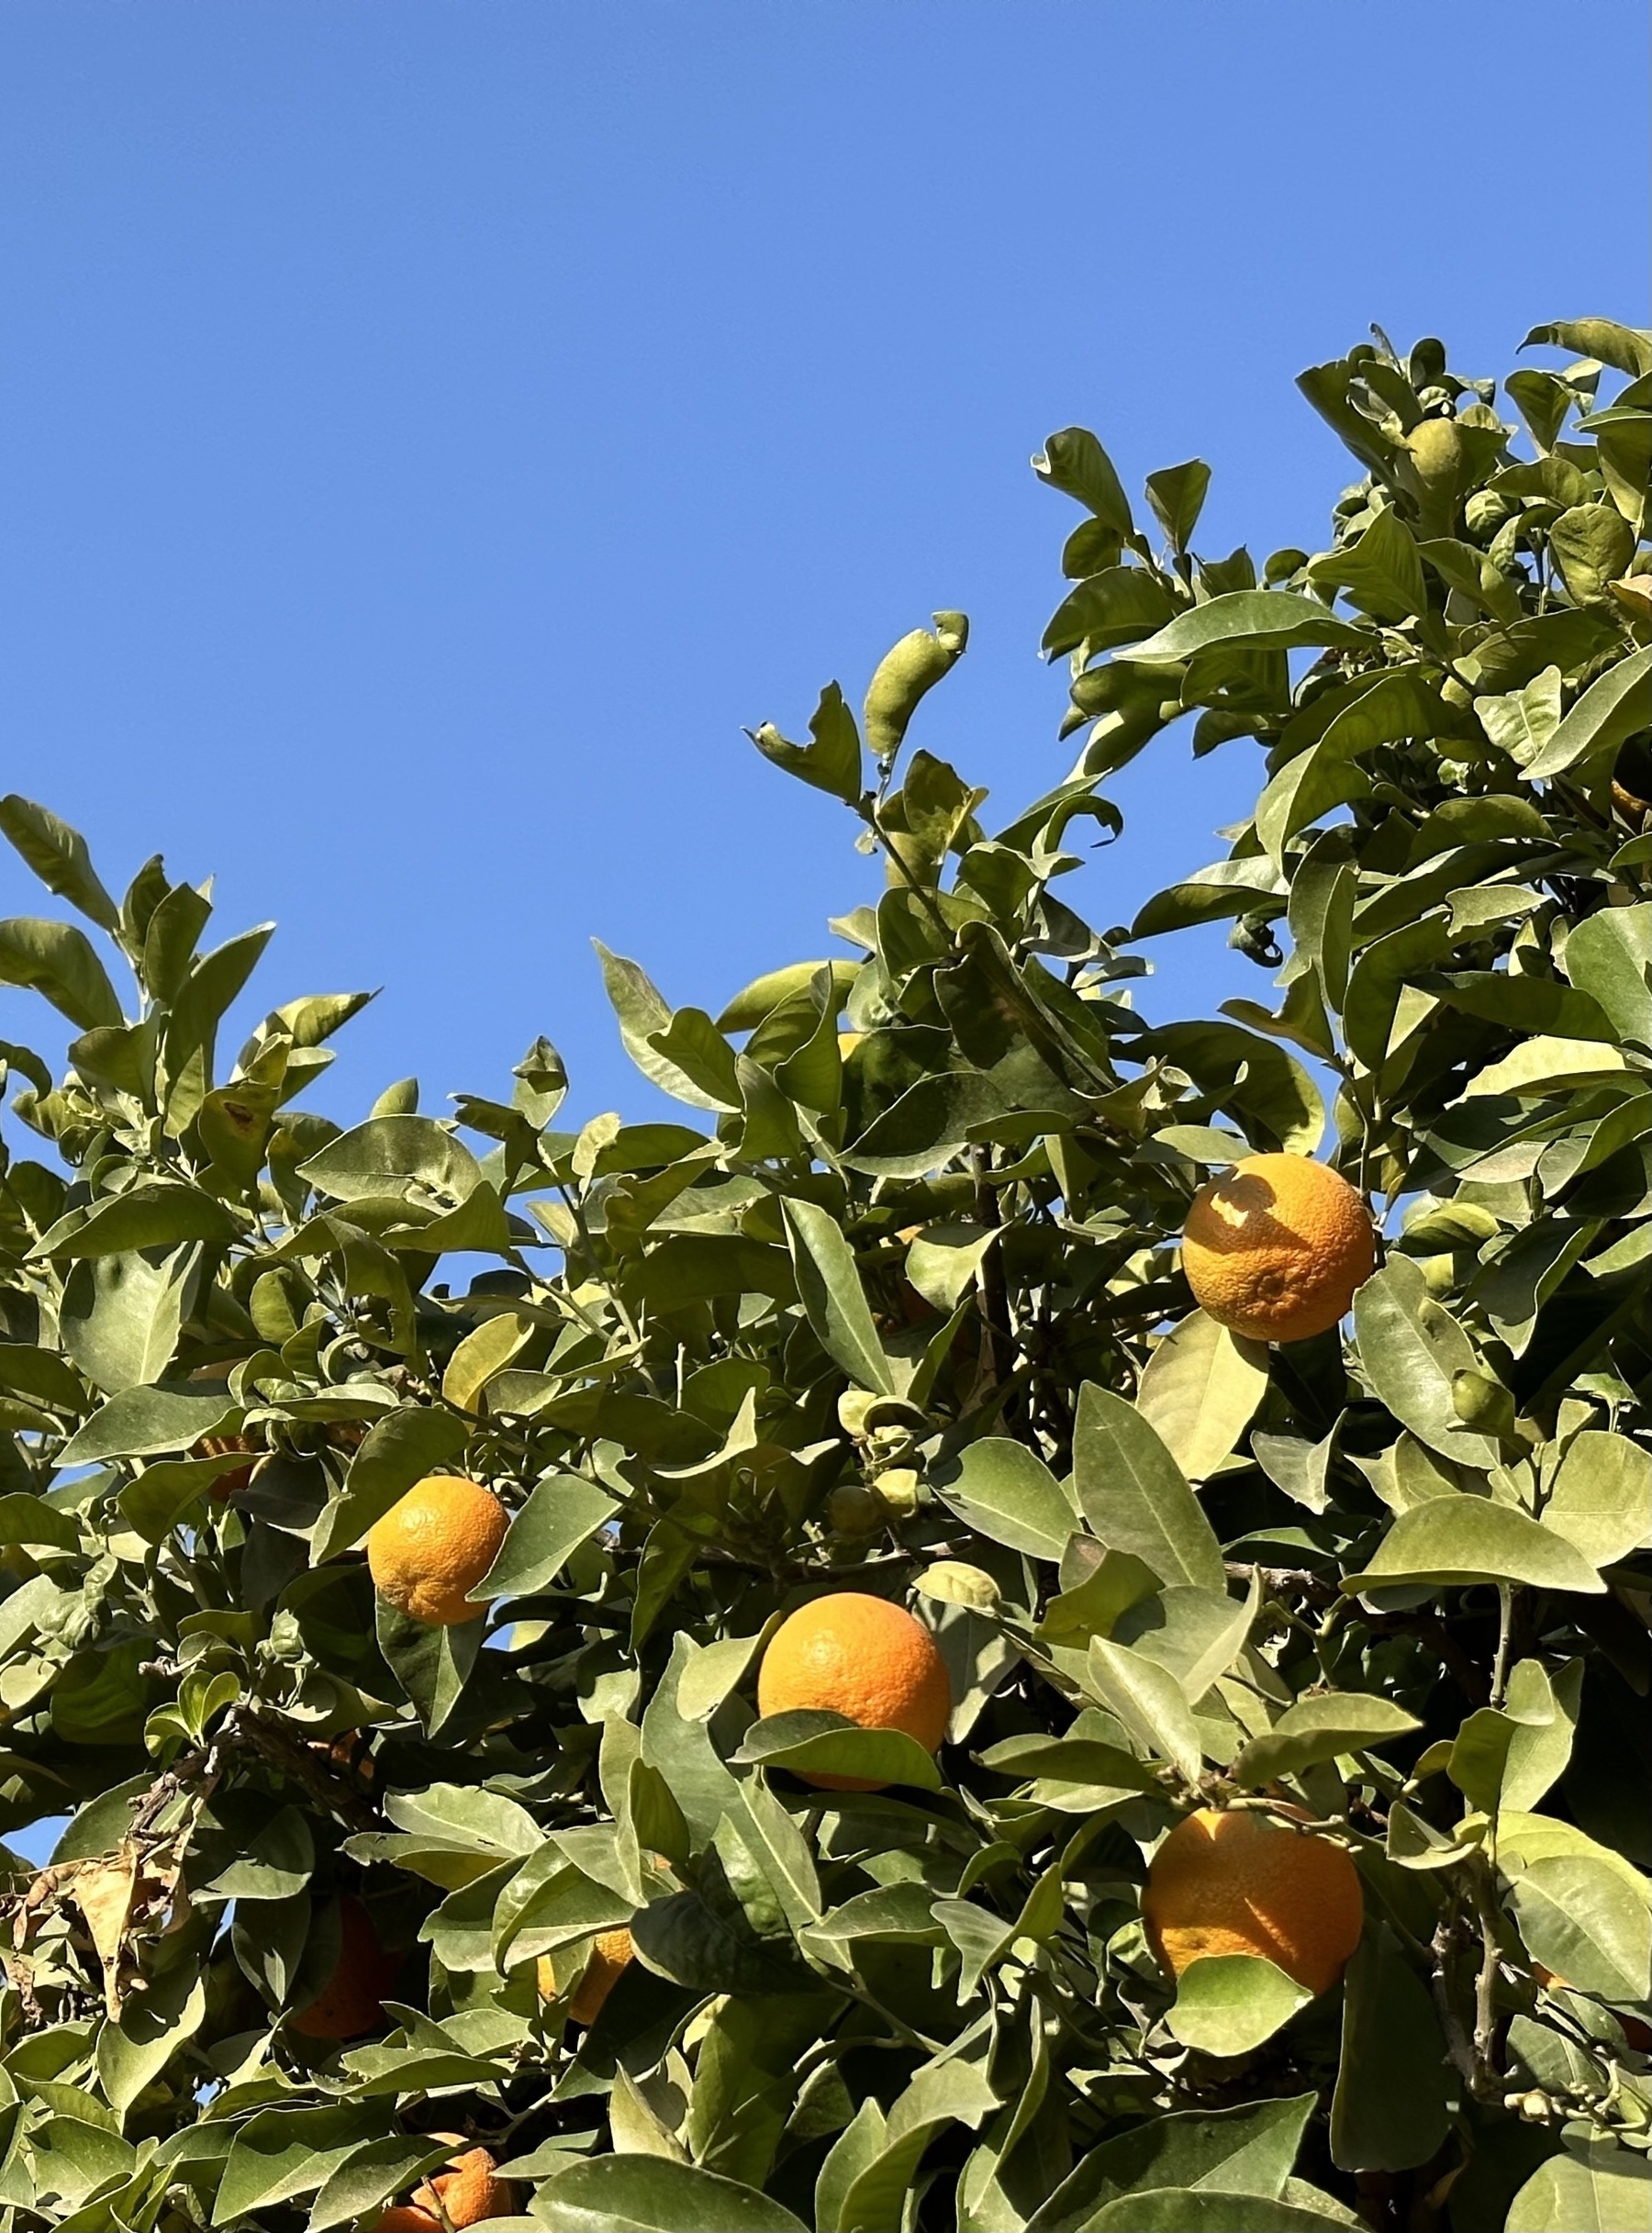 Several brightly lit oranges in a tree, with a clear blue sky above.